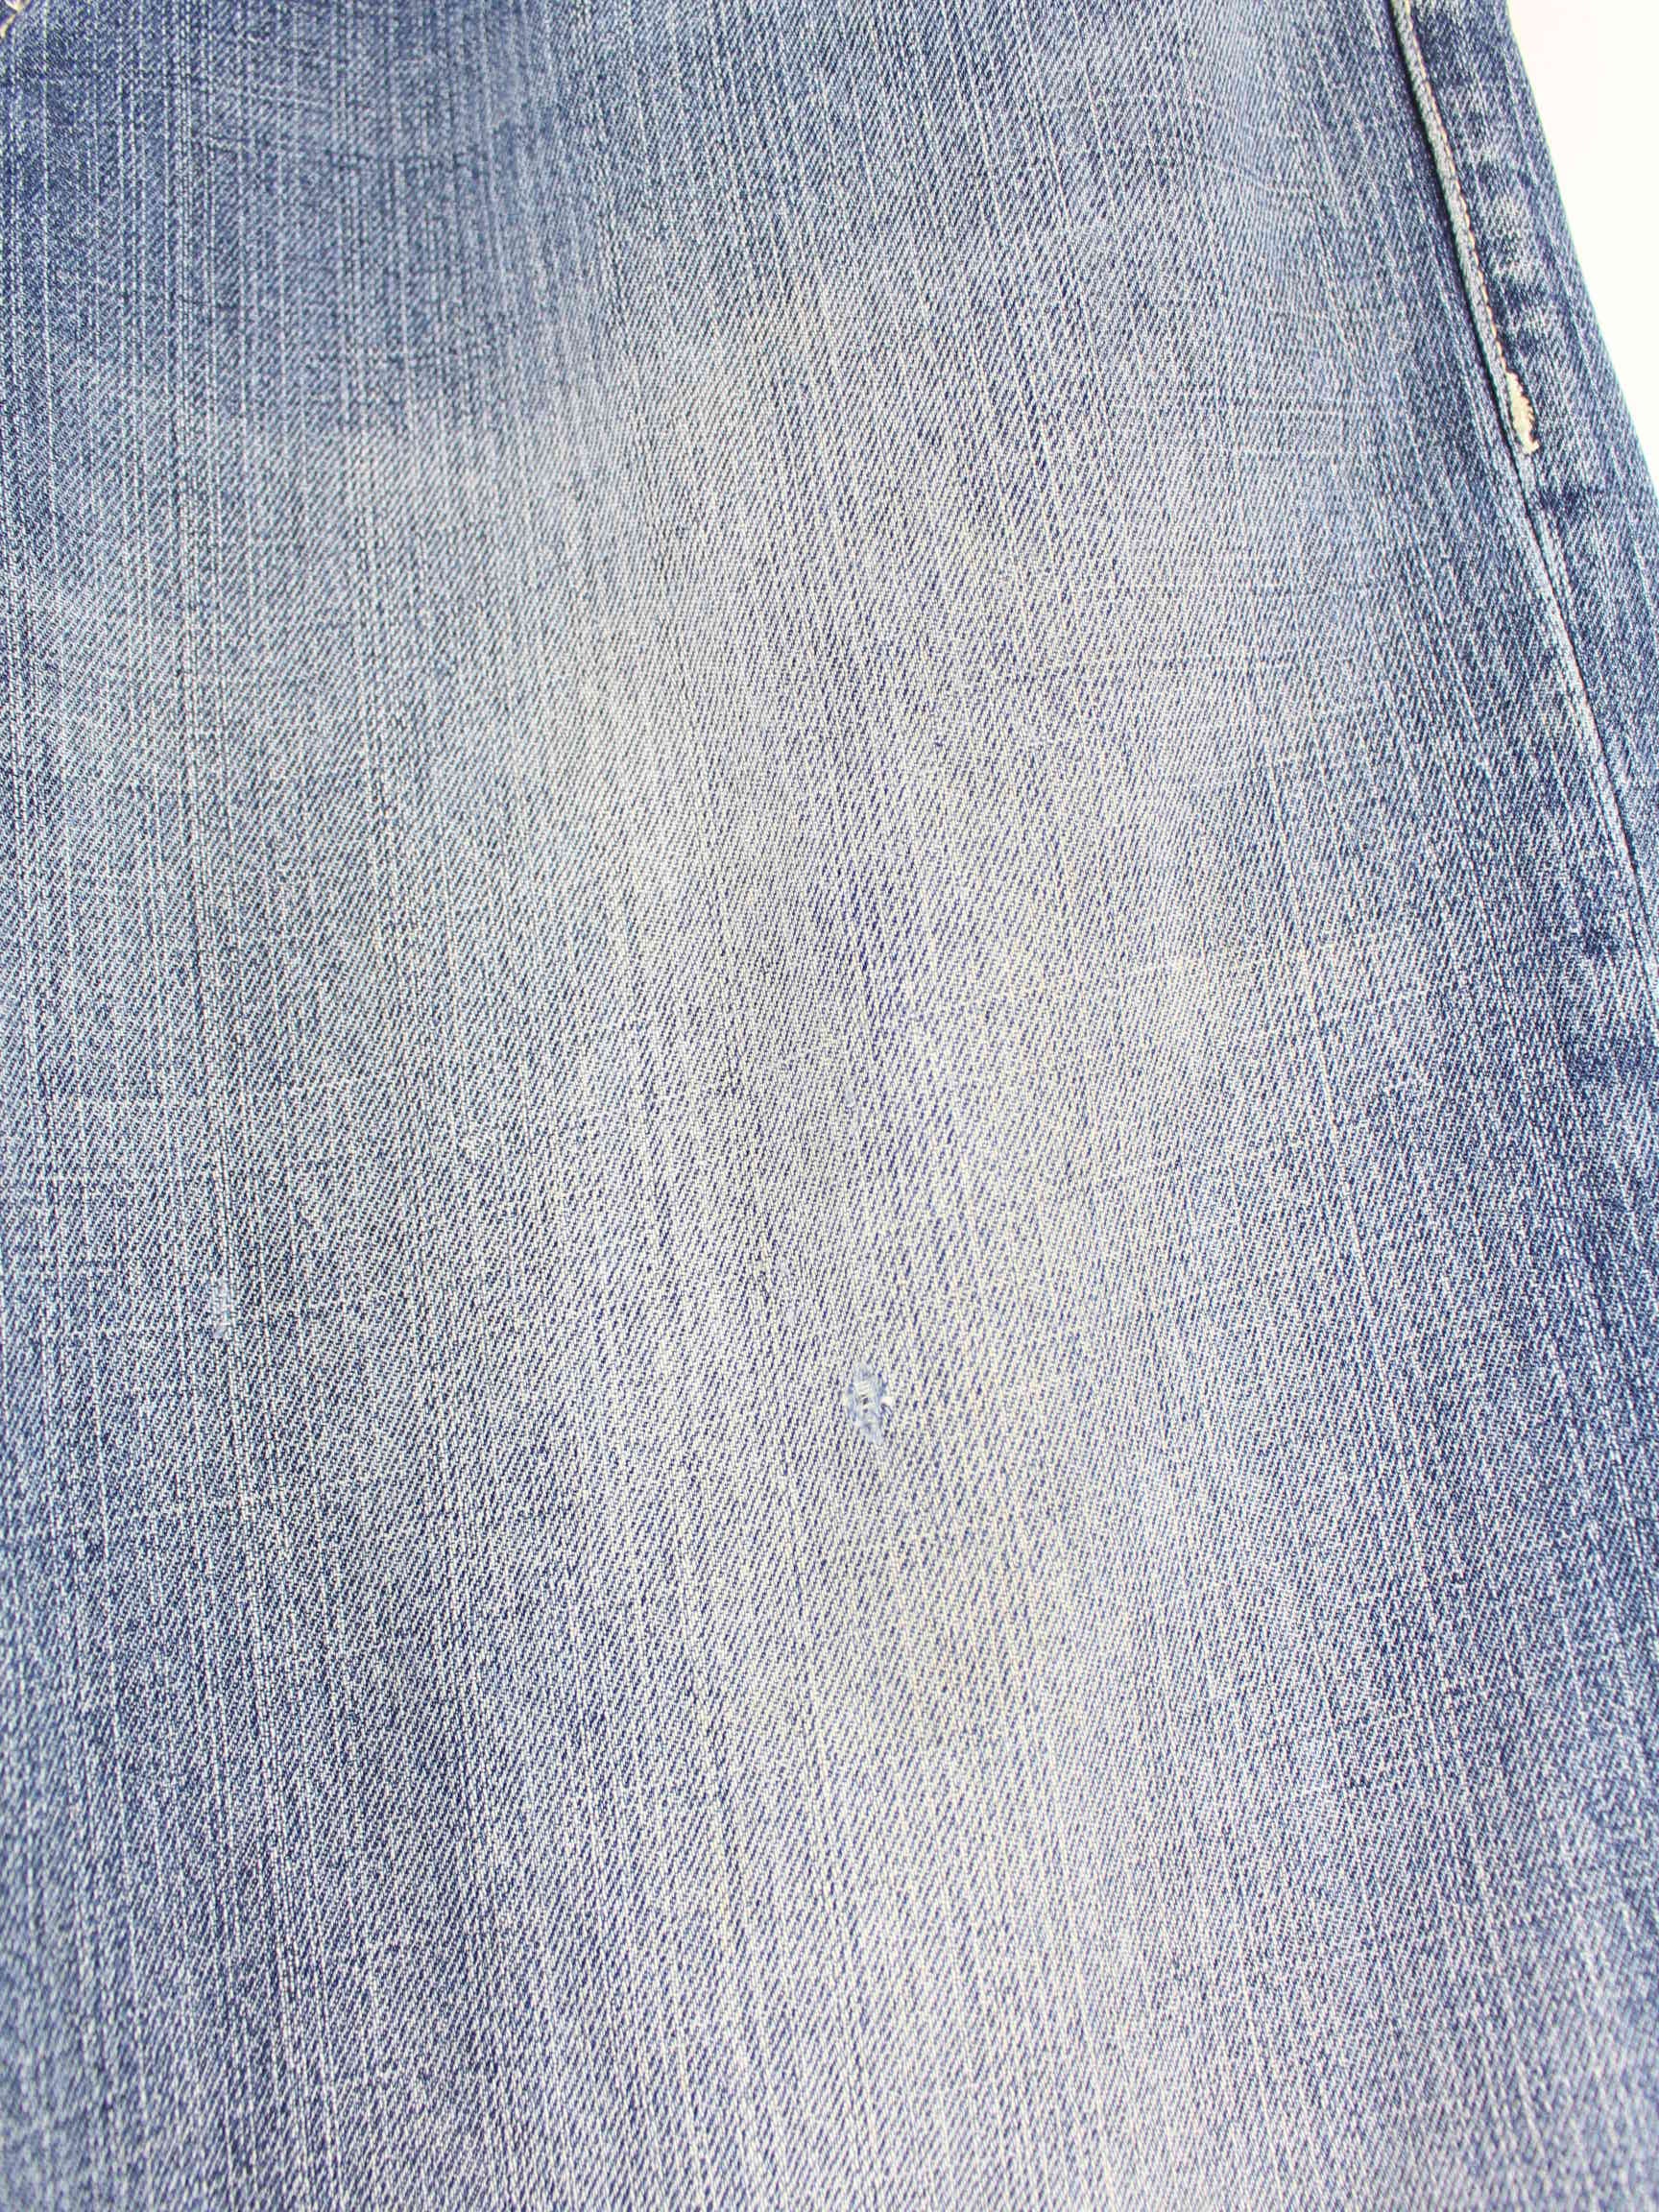 Ecko y2k Embroidered Baggy Fit Jeans Blau W36 L34 (detail image 2)